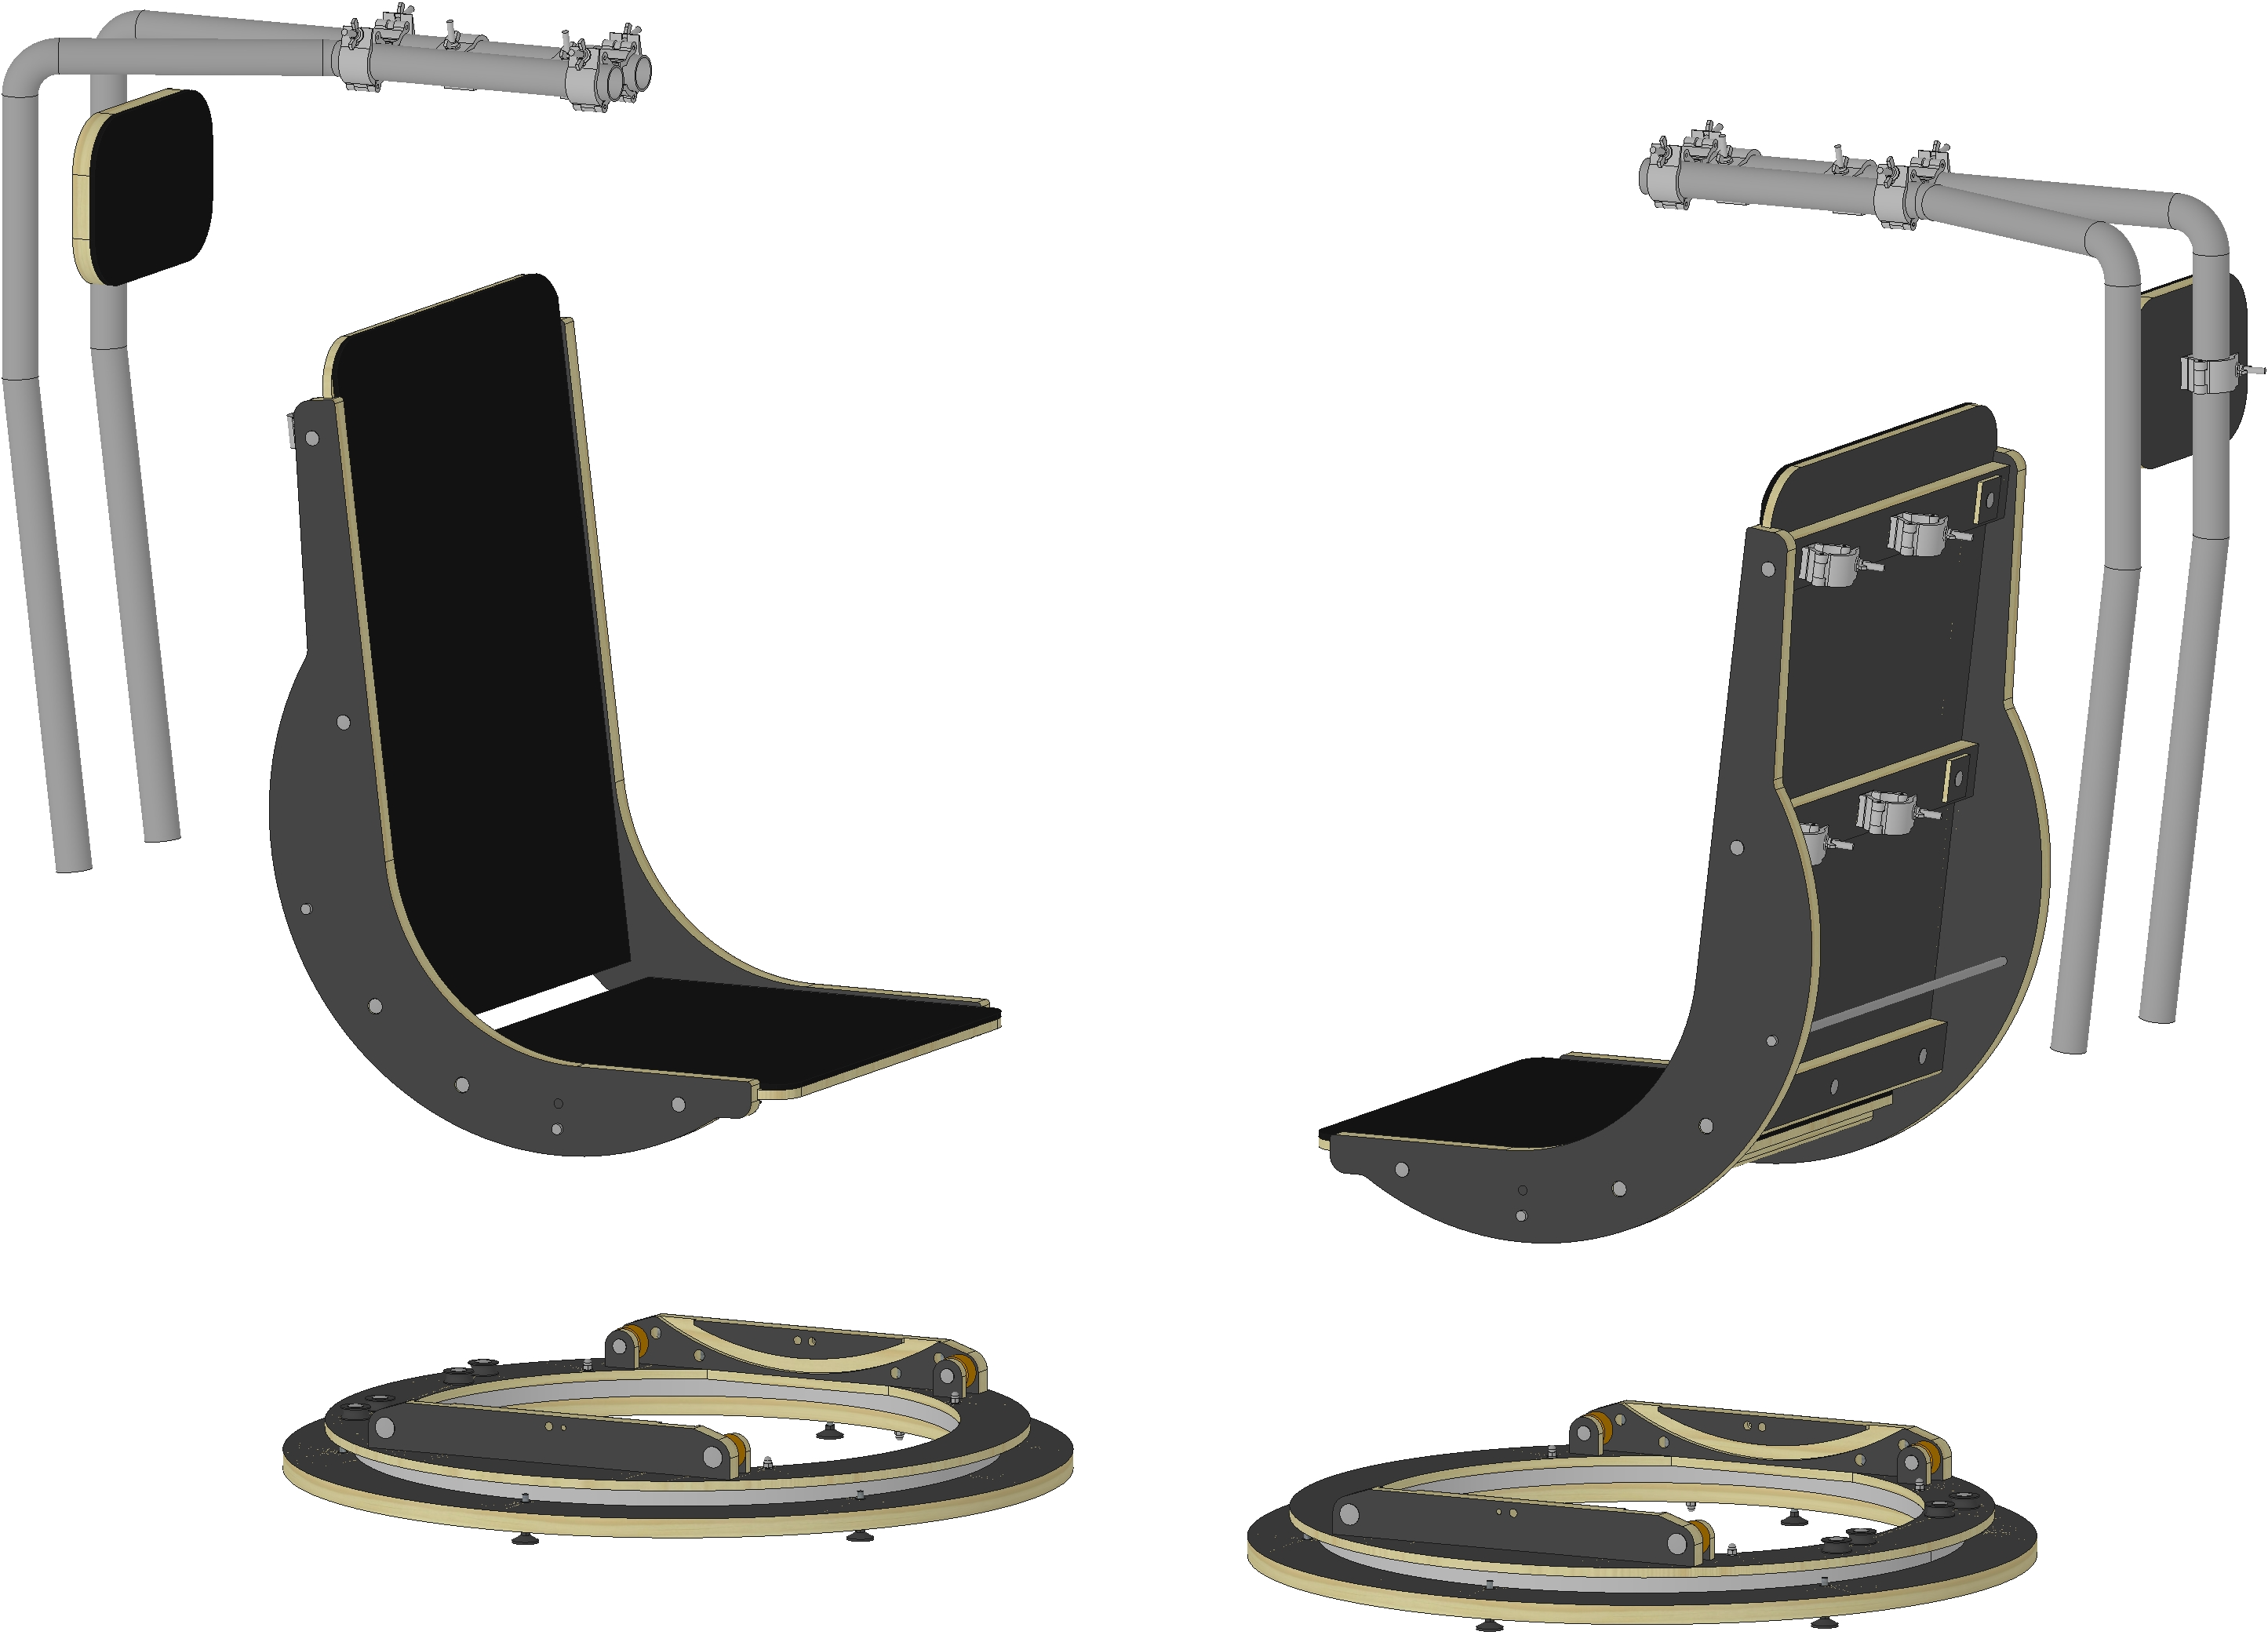 Neowise chair to scan the skies with binoculars - 3D exploded view